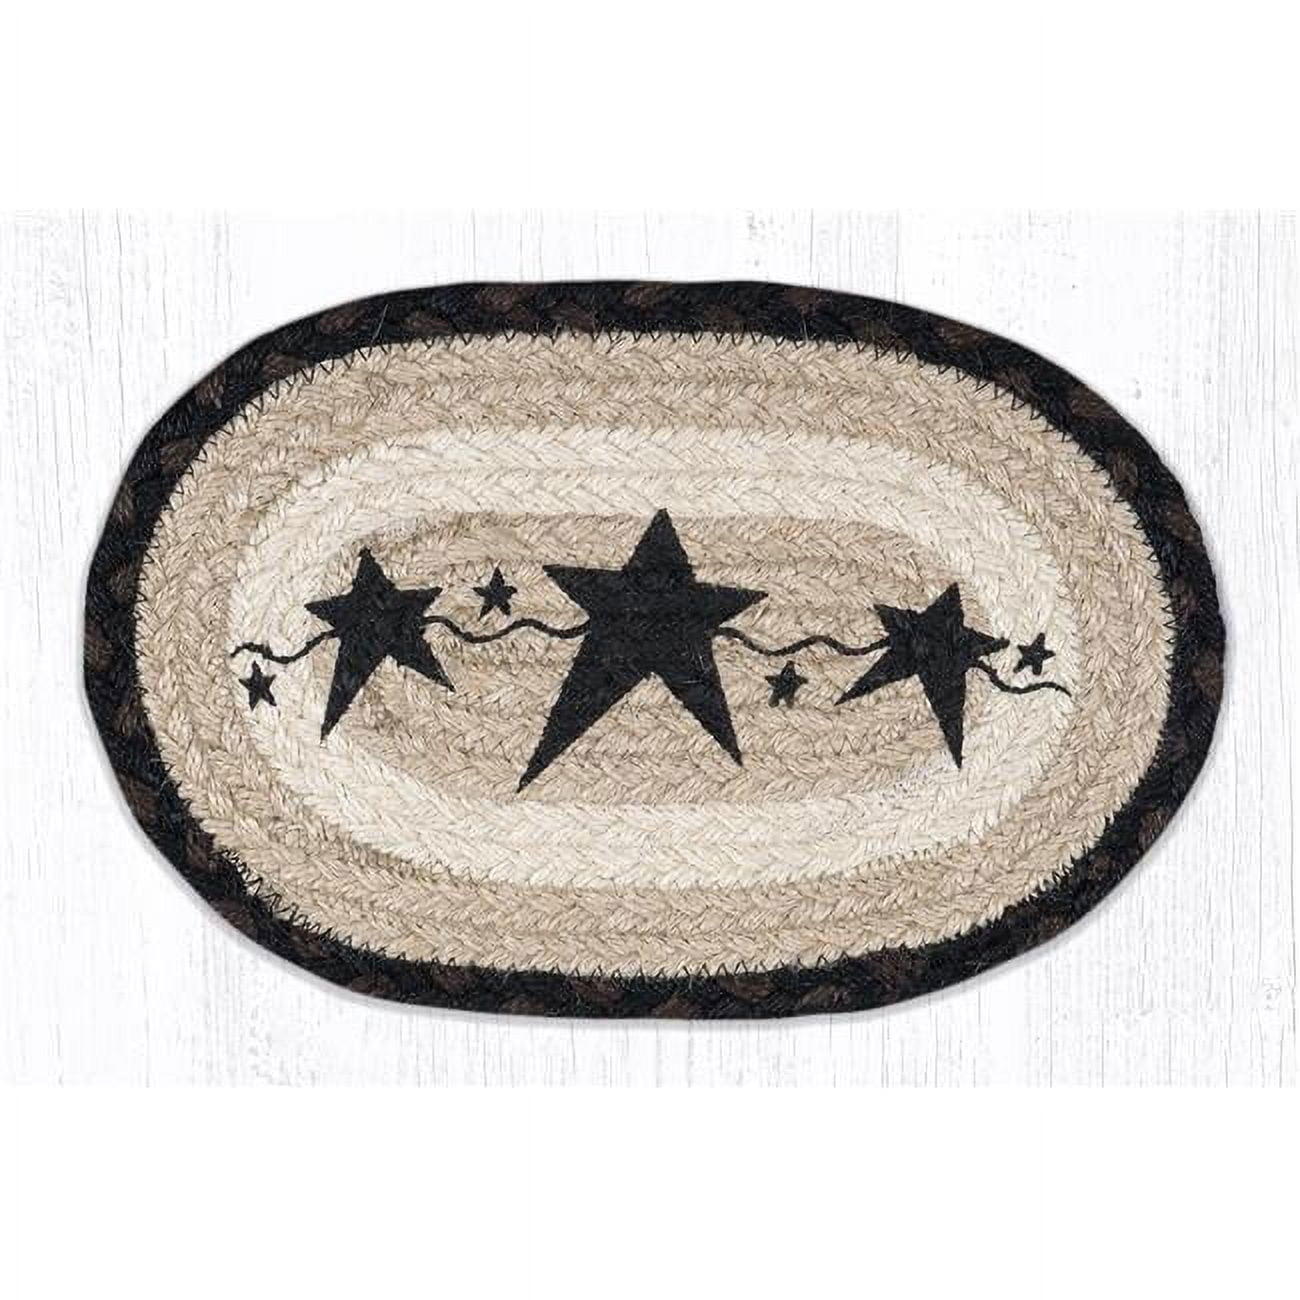 Capitol Importing 01-313psb 7.5 X 11 In. Omsp-313 Primitive Star Black Printed Oval Swatch